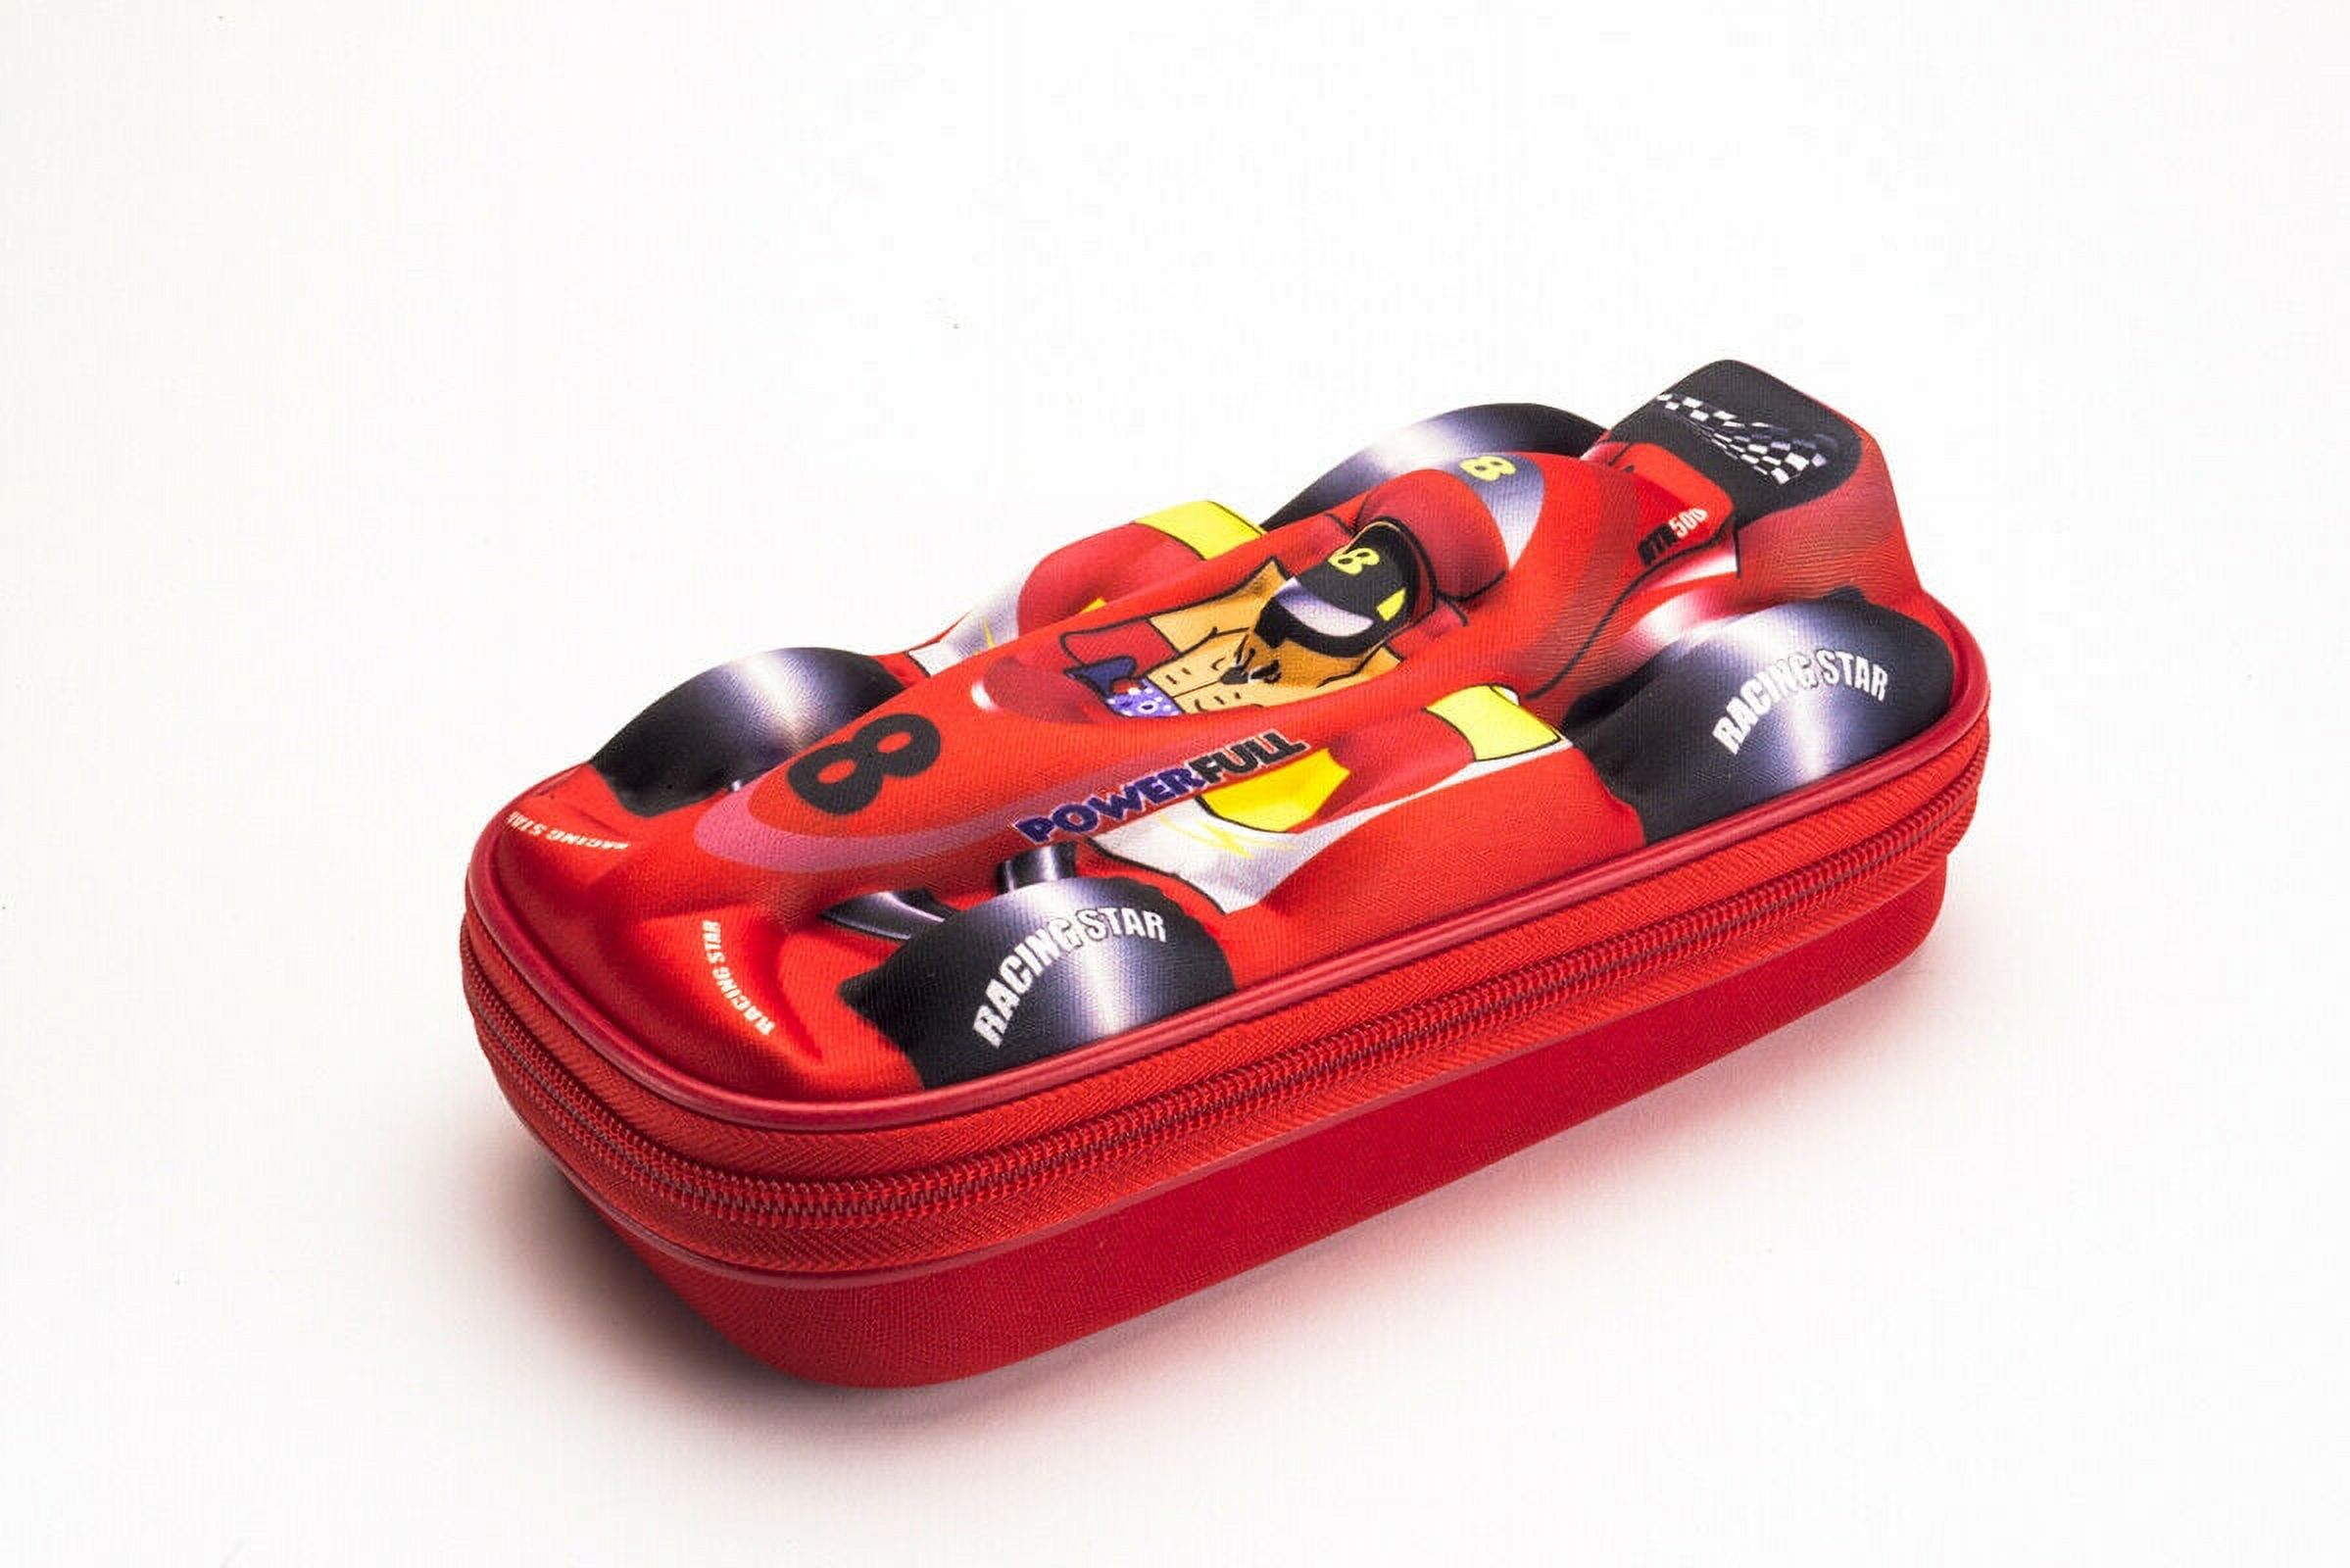 Maxi's Design Race Car Shaped Pencil Case for Boys with Zipper, Red 